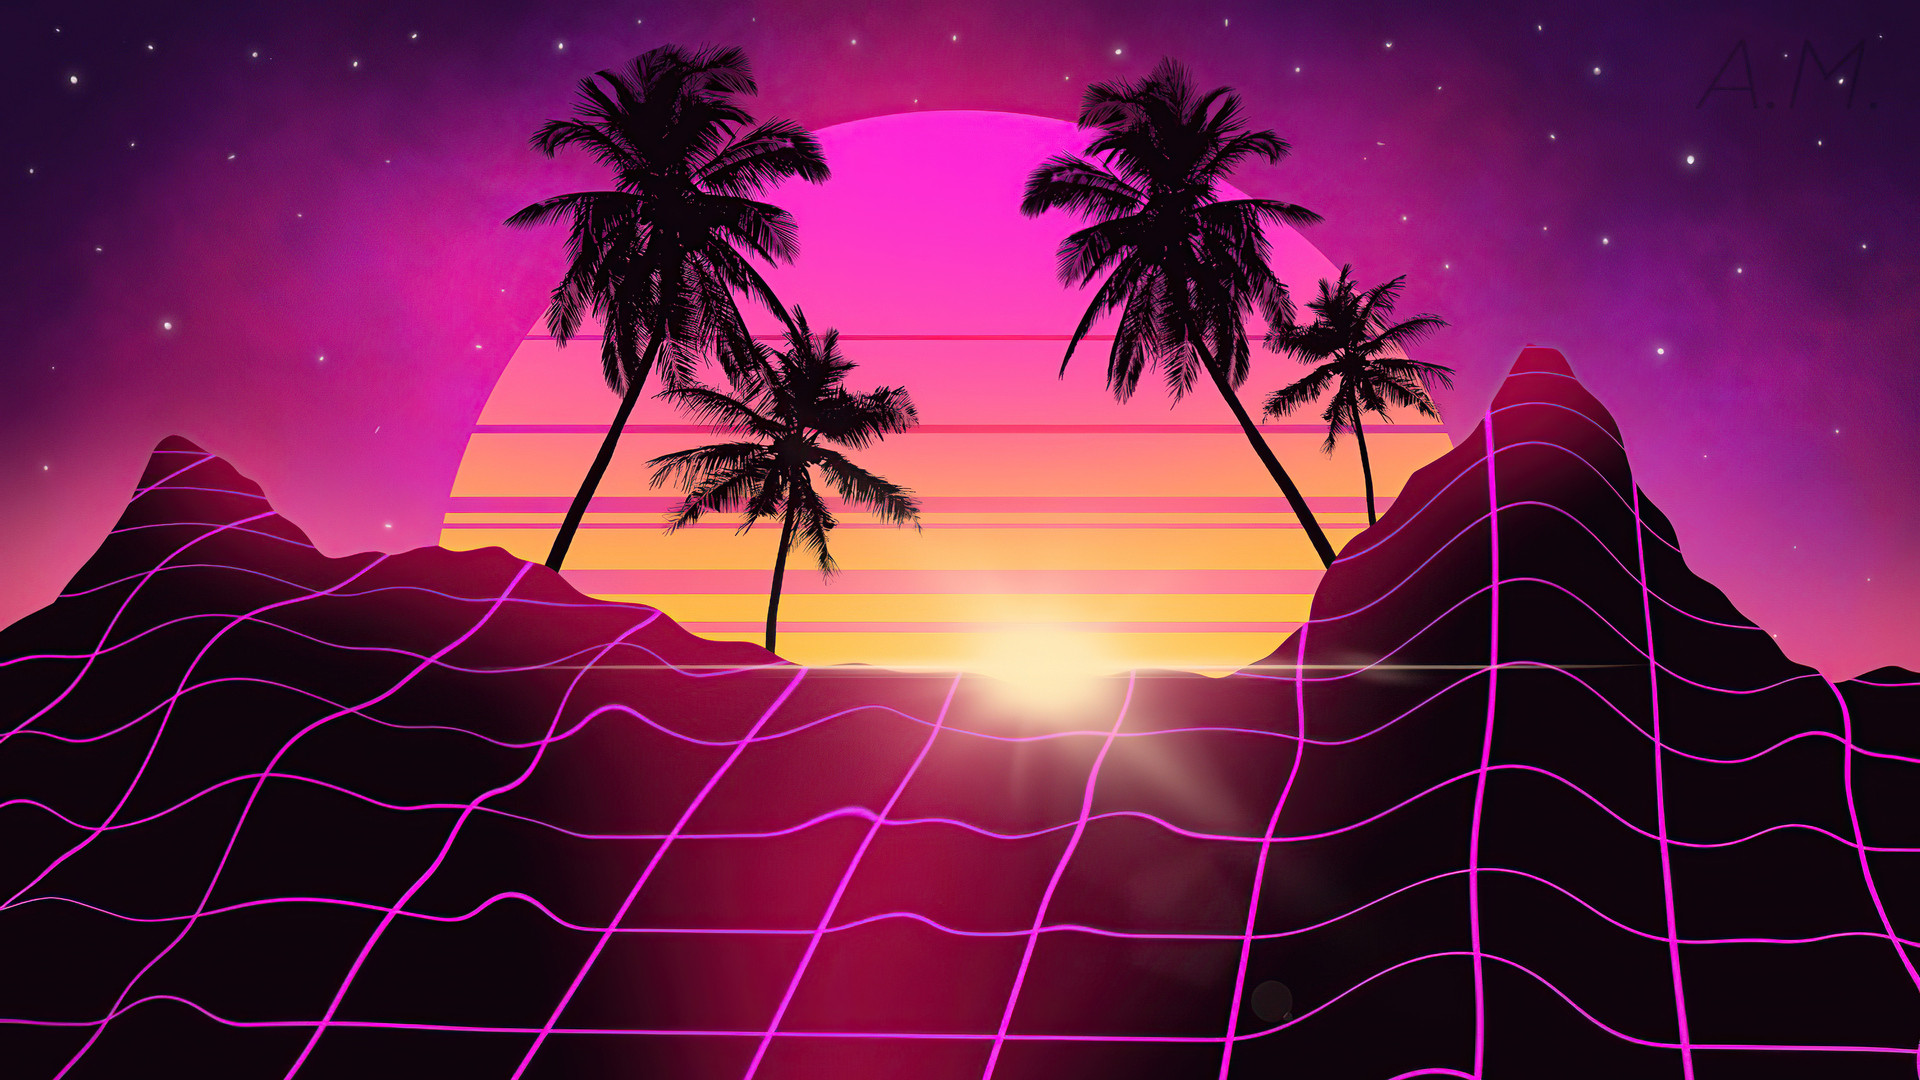 A pink and purple sunset with palm trees and mountains - Miami